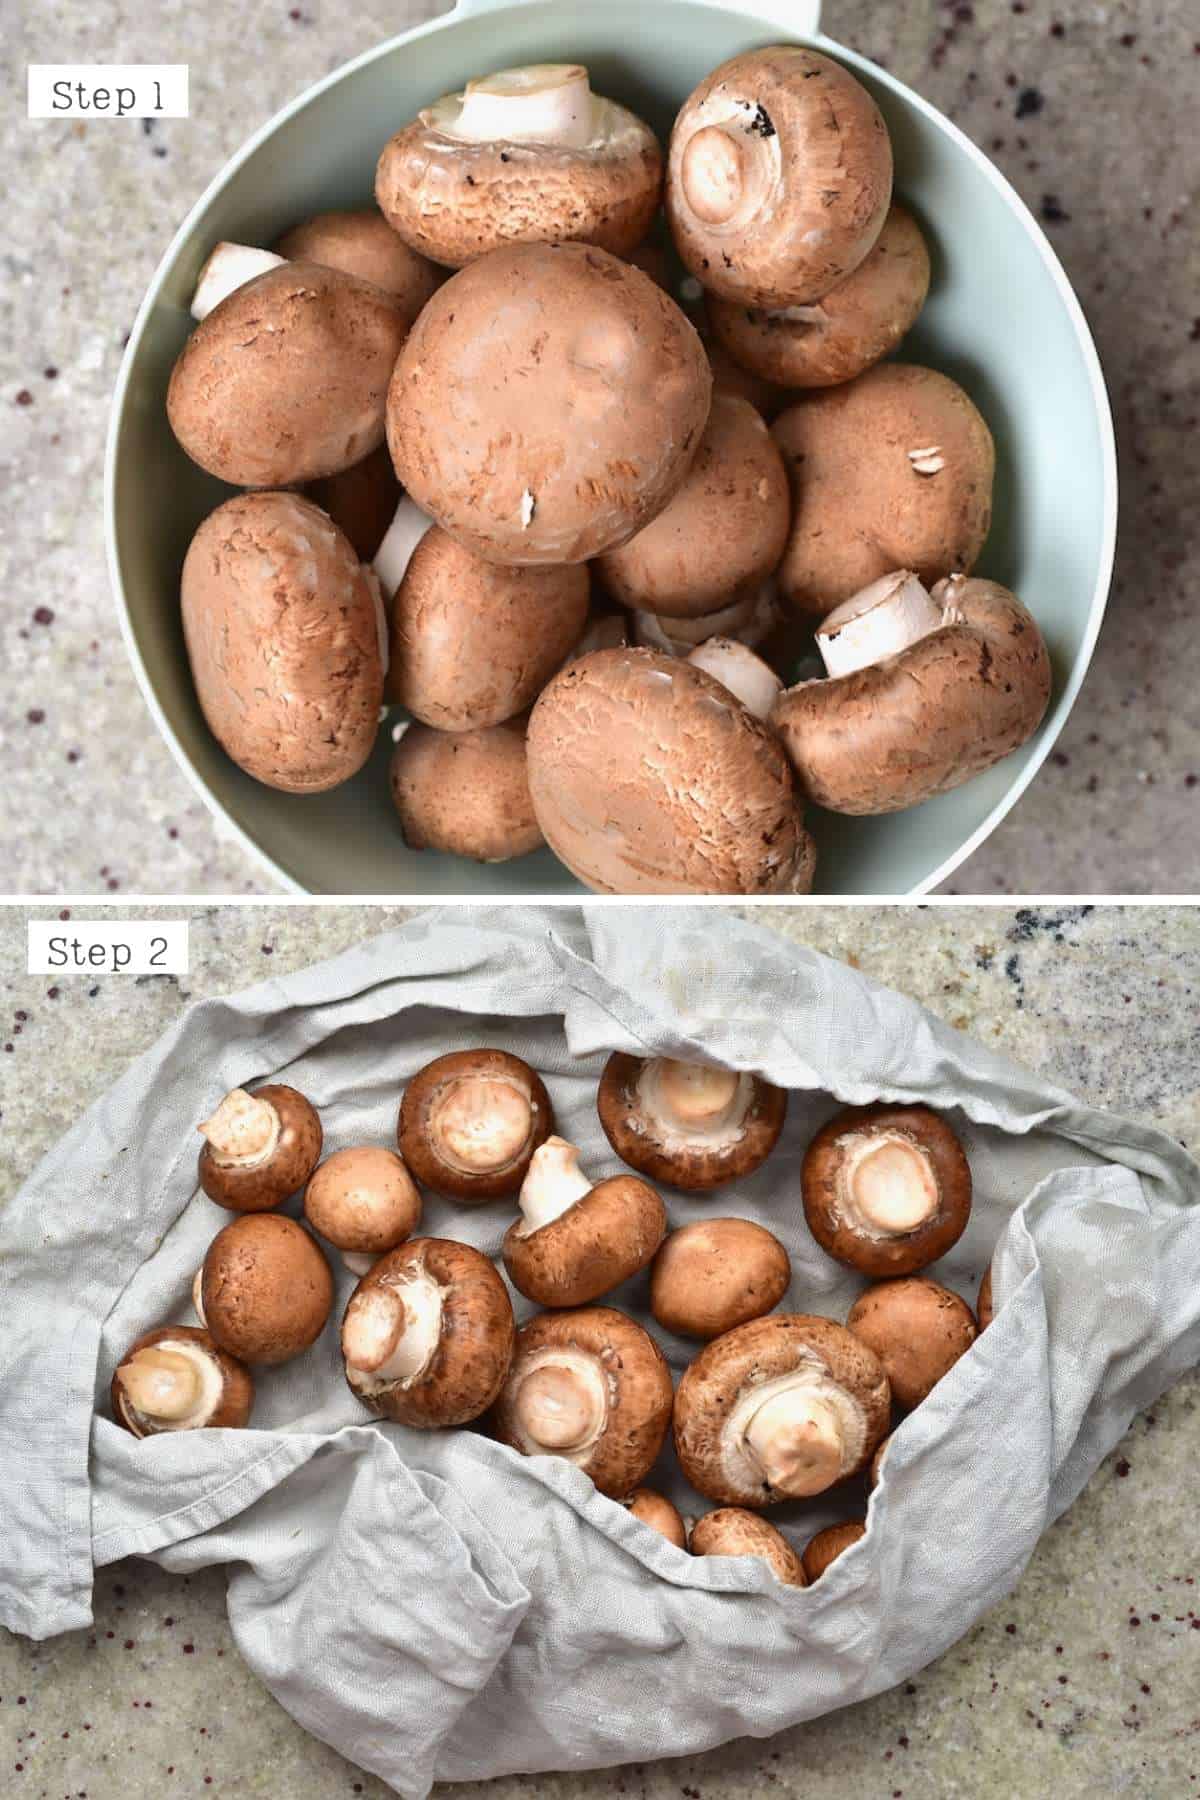 https://www.alphafoodie.com/wp-content/uploads/2021/02/Steps-for-cleaning-mushrooms.jpg